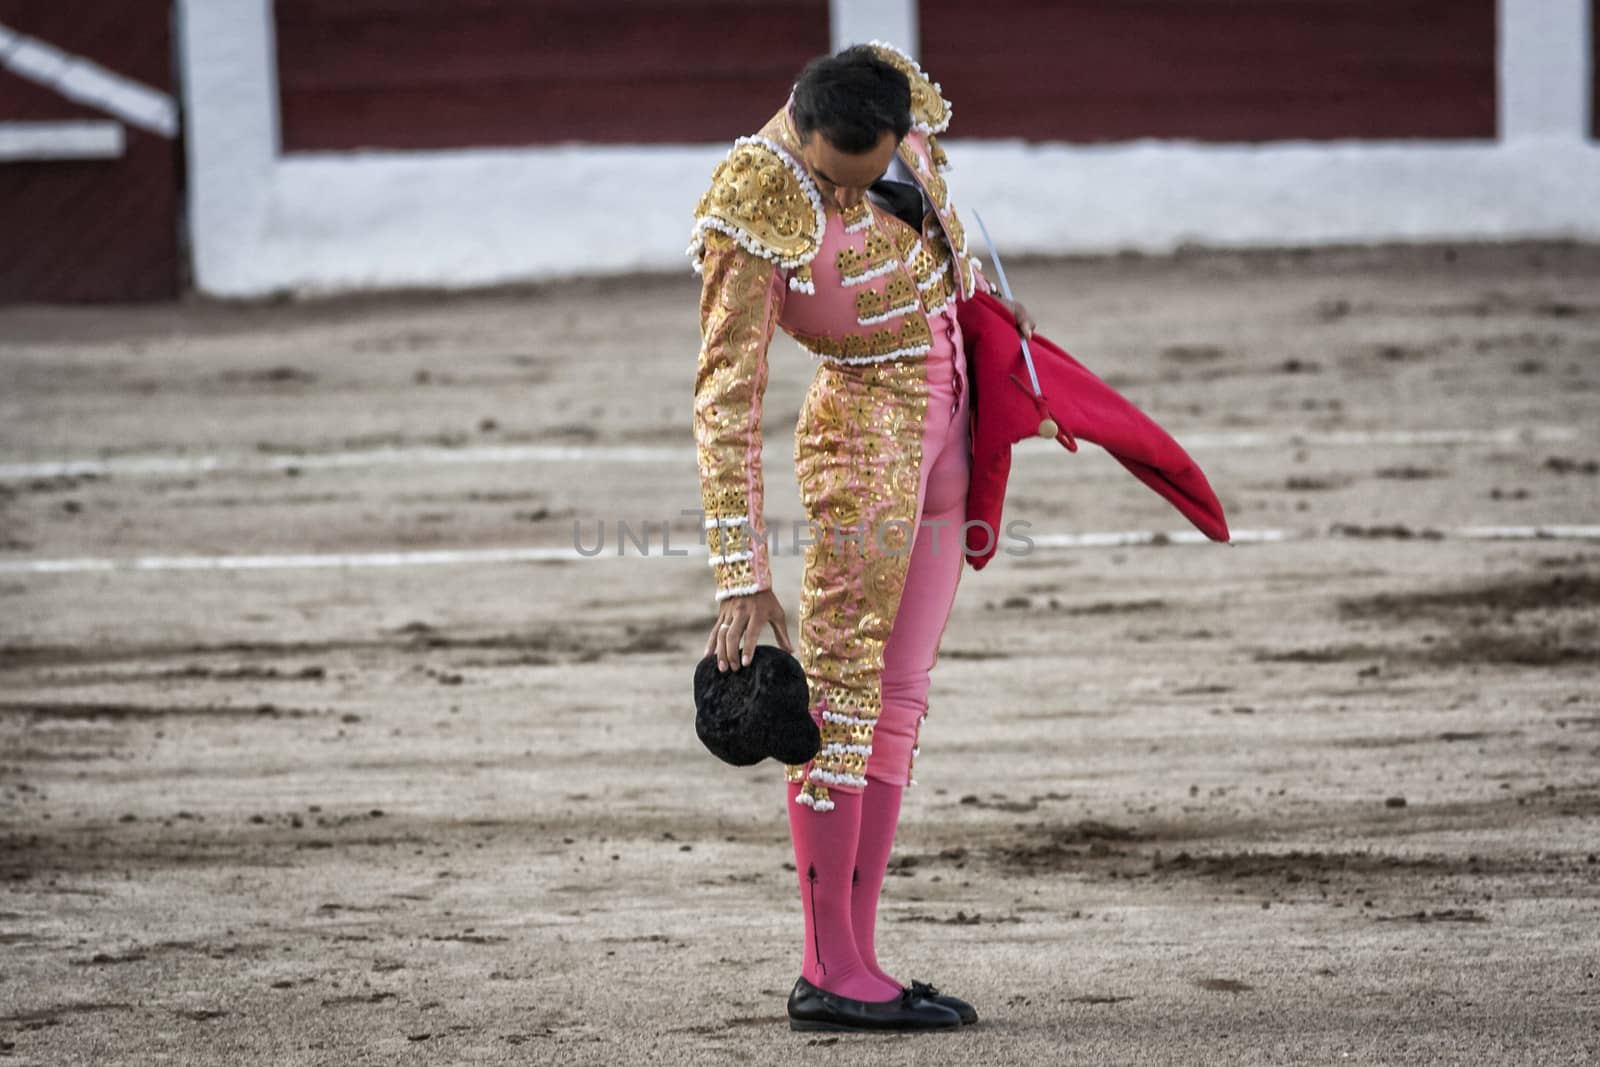 Linares, Jaen province, SPAIN - 28 august 2011: Spanish bullfighter Manuel Jesus El Cid drops his hat on the ground, it is a very old tradition, given that if the hat falls down you give luck to the Bullfighter in his work during a bullfight held in Linares, Jaen province, Spain, 28 august 2011